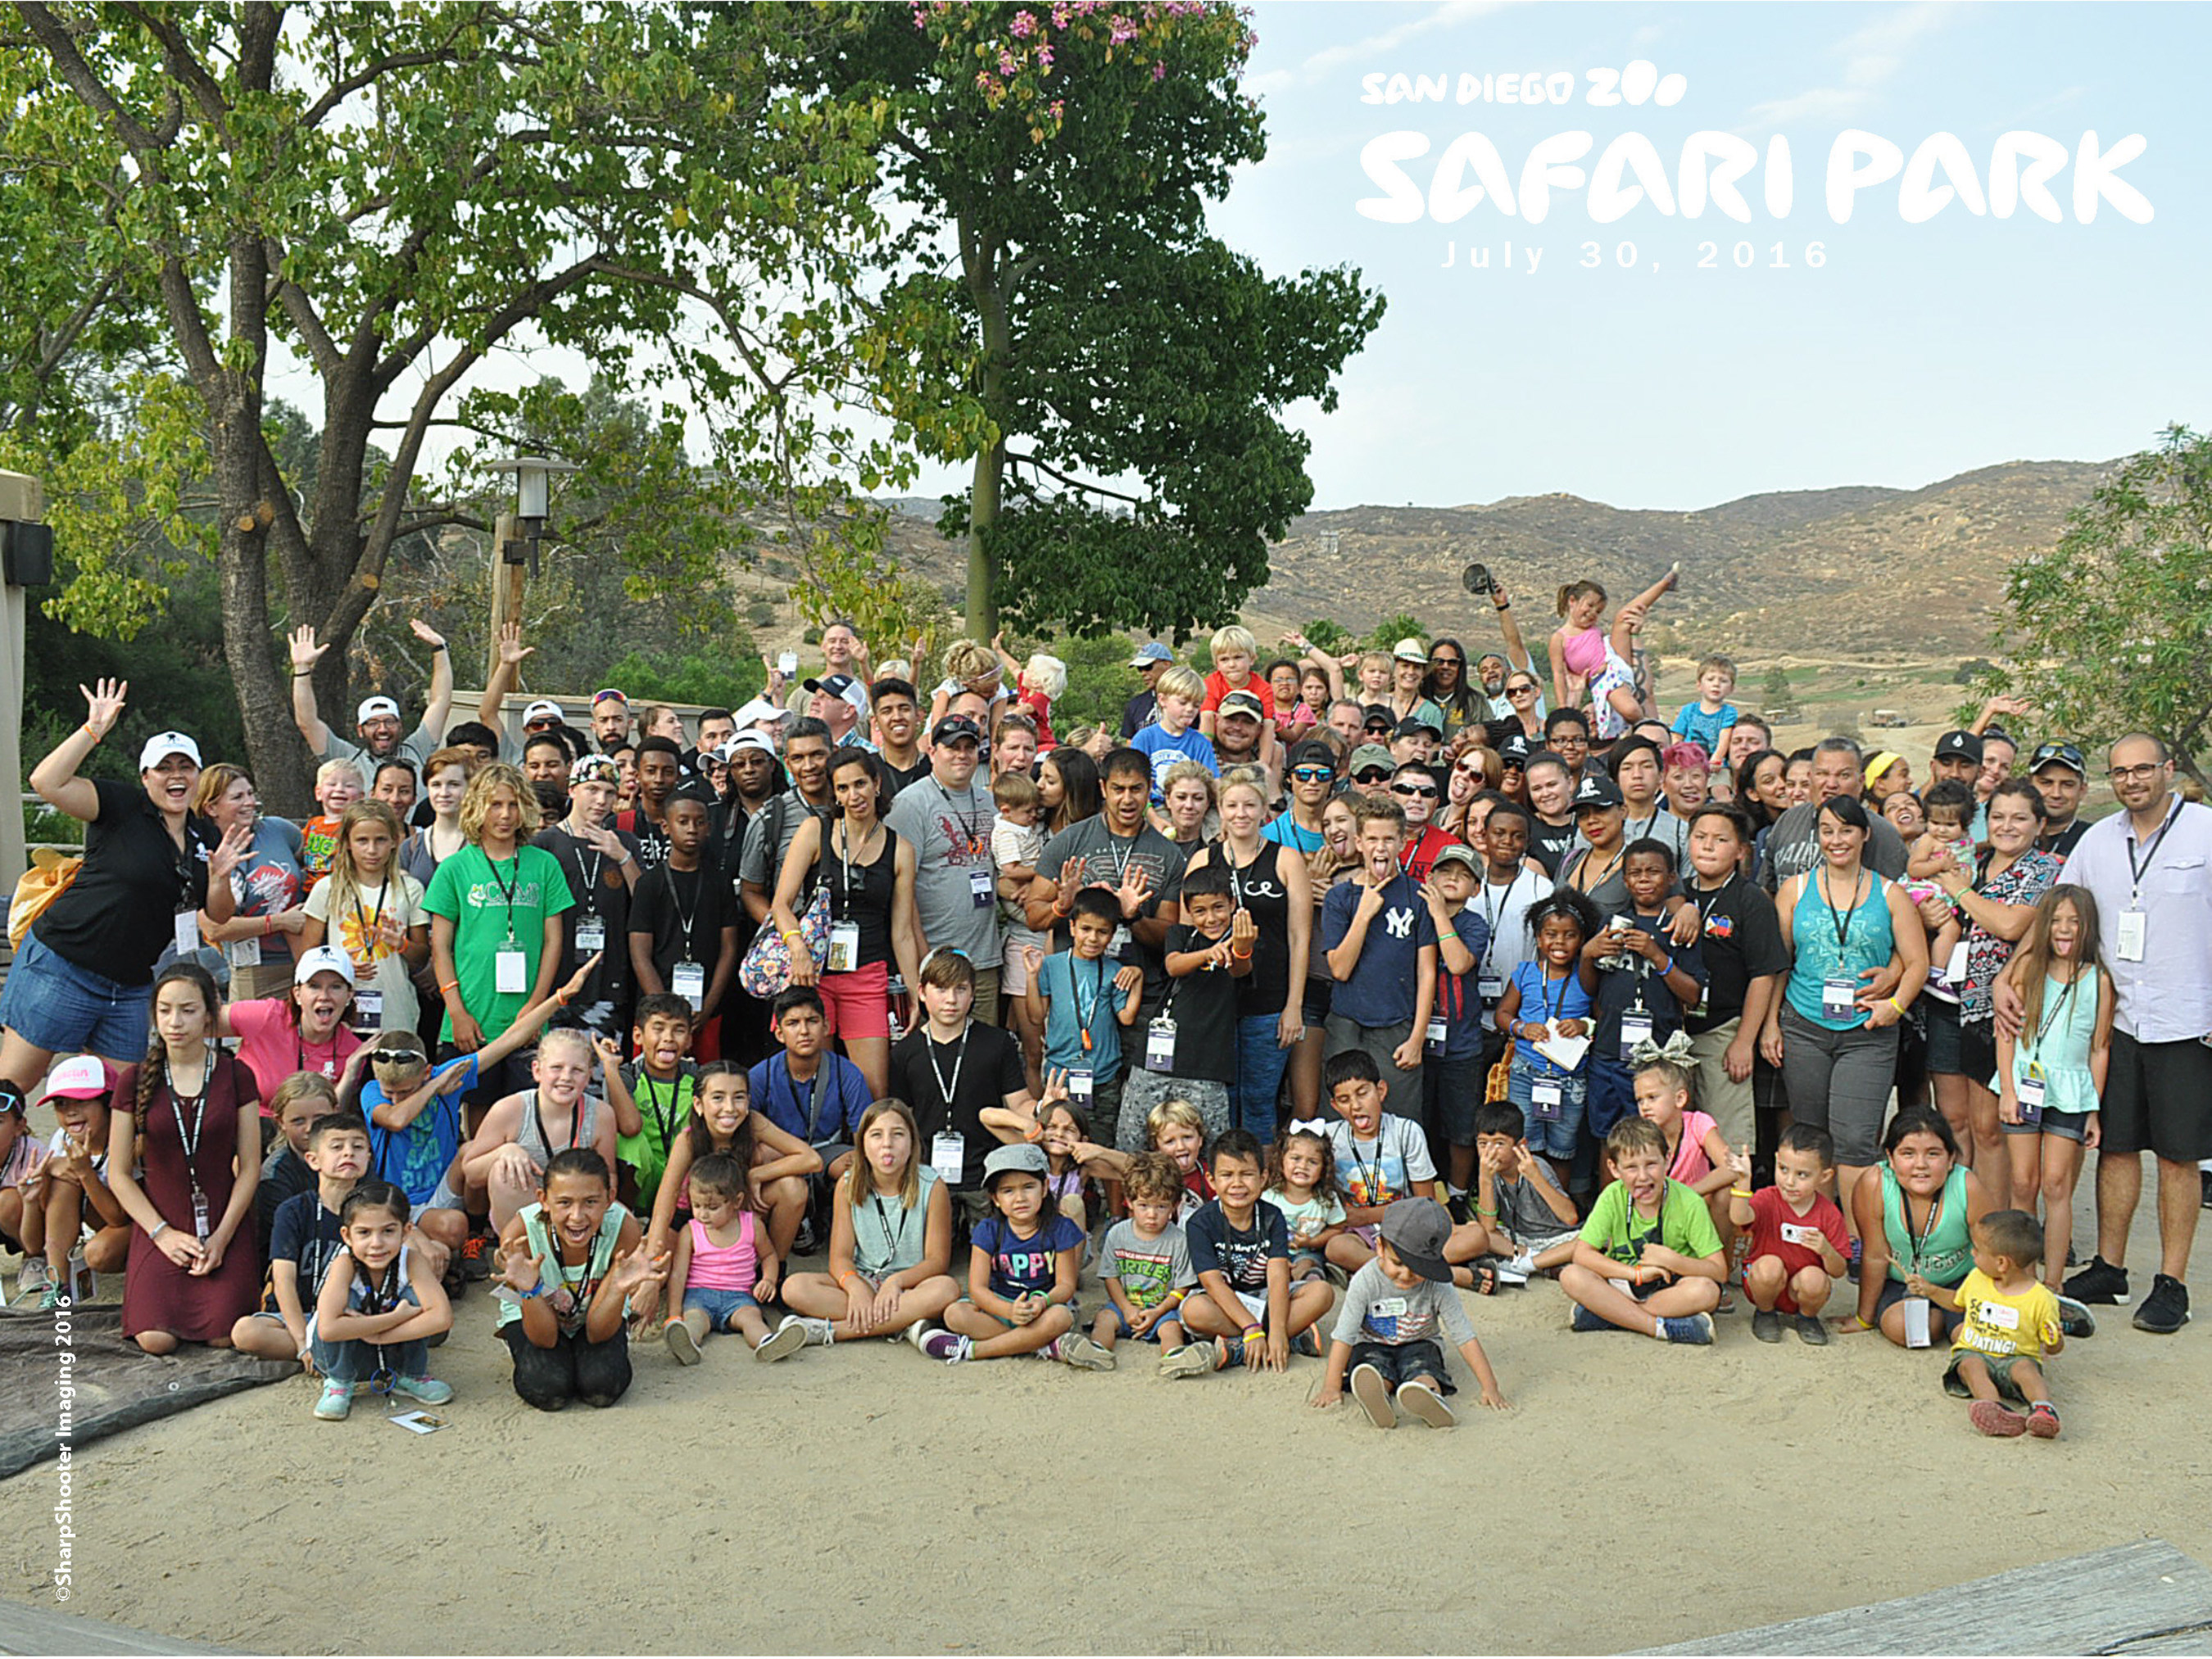 Injured veterans and their families enjoyed their safari sleepover experience during a recent Wounded Warrior Project outing at the San Diego Zoo Safari Park.